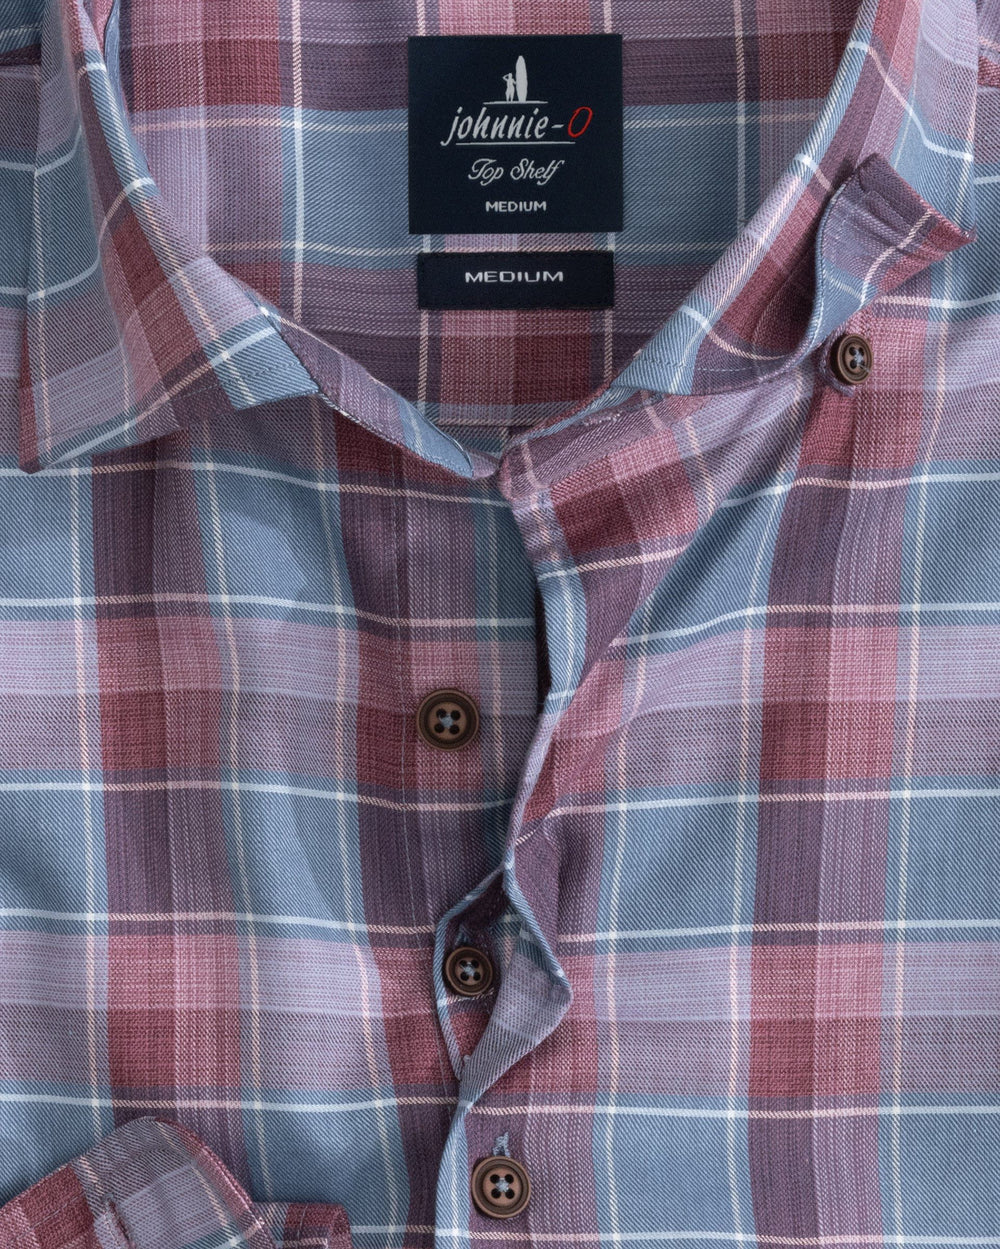 Andes Top Shelf Button-Up Shirt